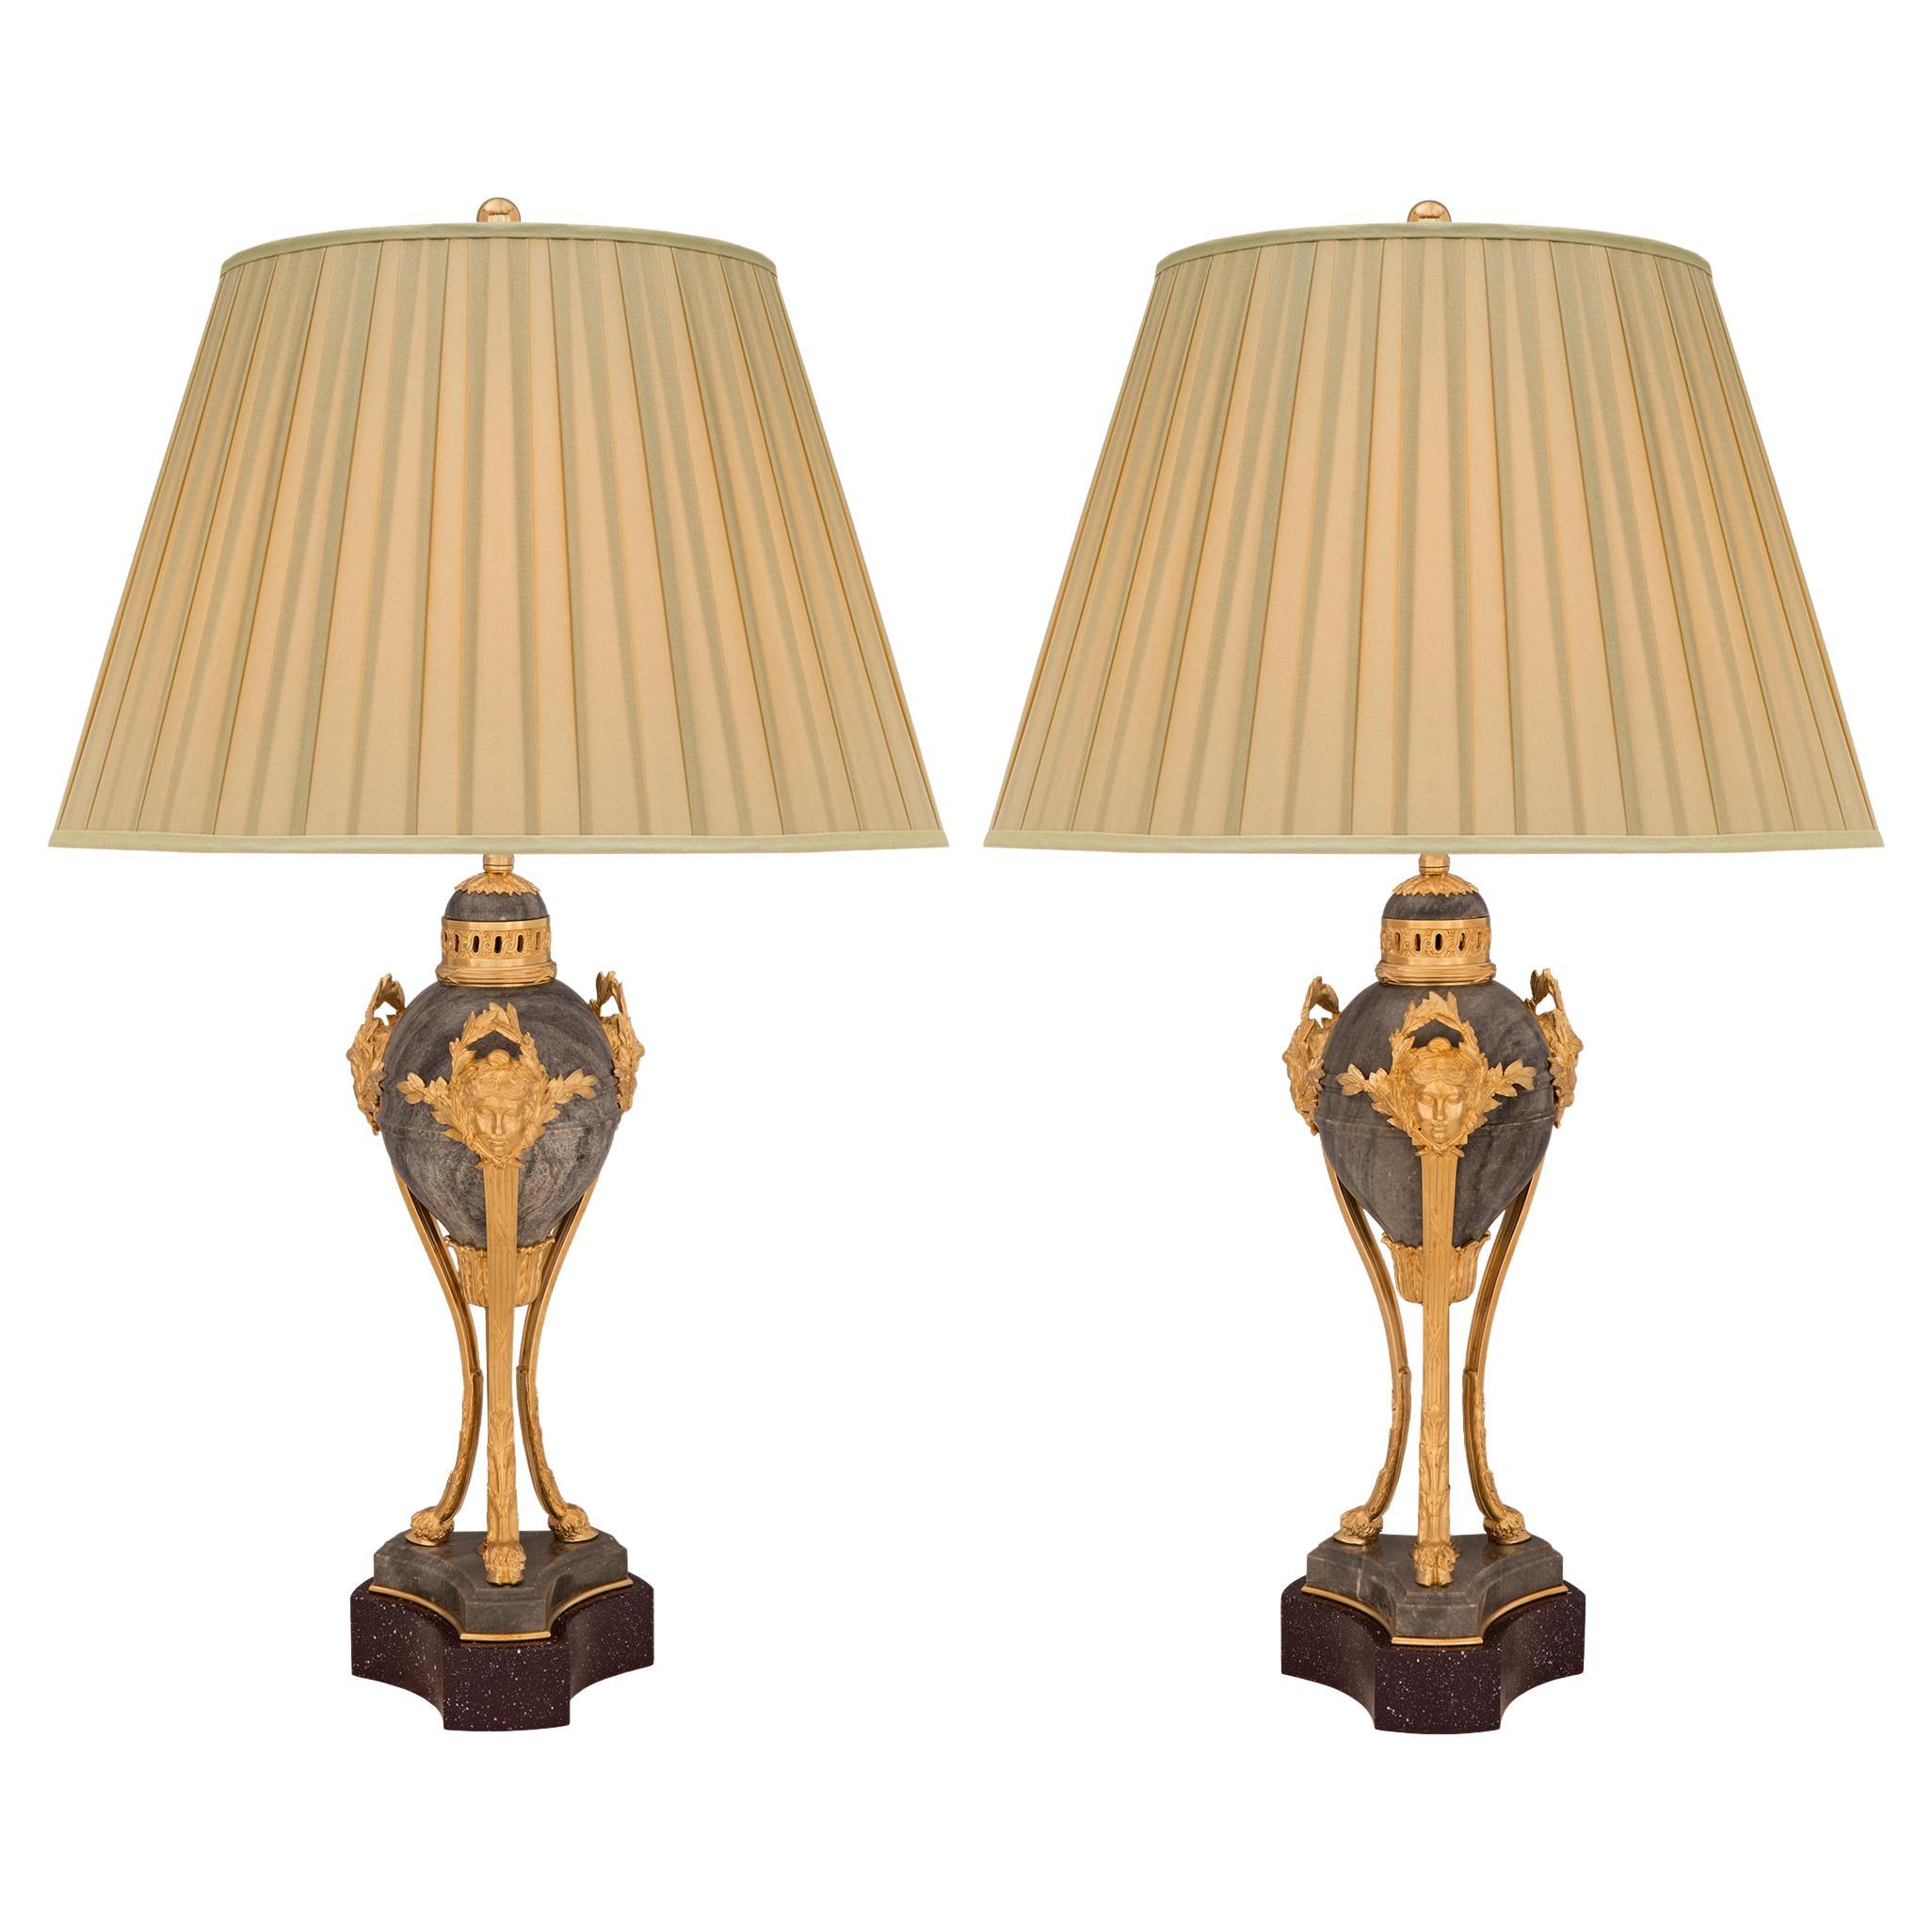 Pair of French 19th Century Louis XVI Style Lamps